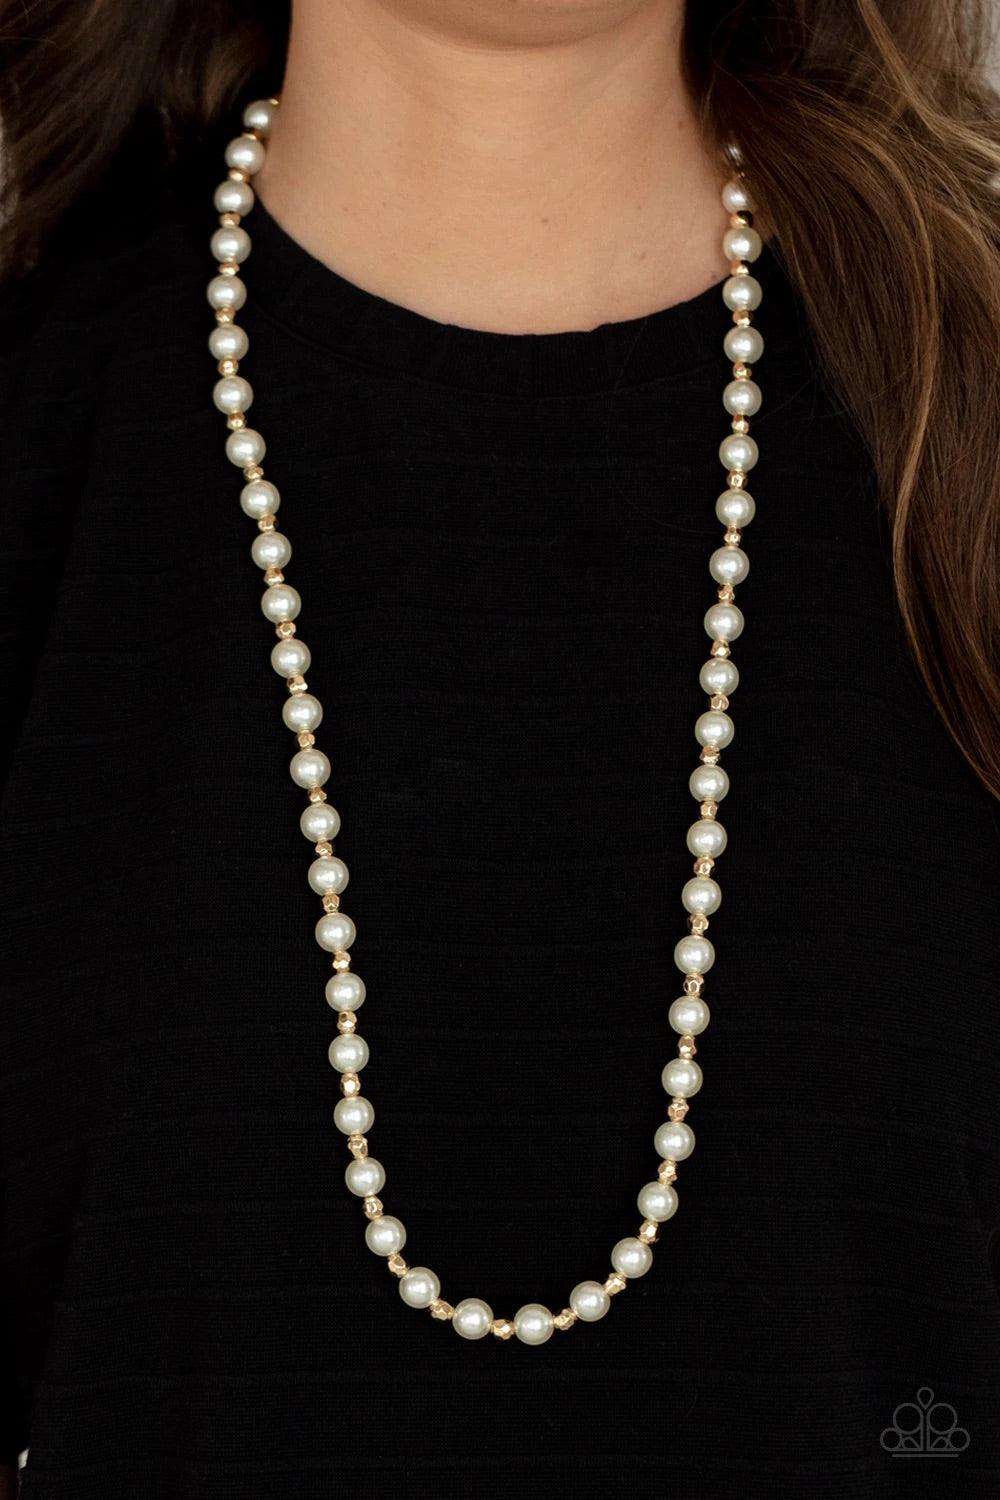 Paparazzi Accessories Nautical Novelty - White Classic white pearls and faceted gold beads alternate along an invisible wire below the collar, creating a timeless twist. Features an adjustable clasp closure. Sold as one individual necklace. Includes one p